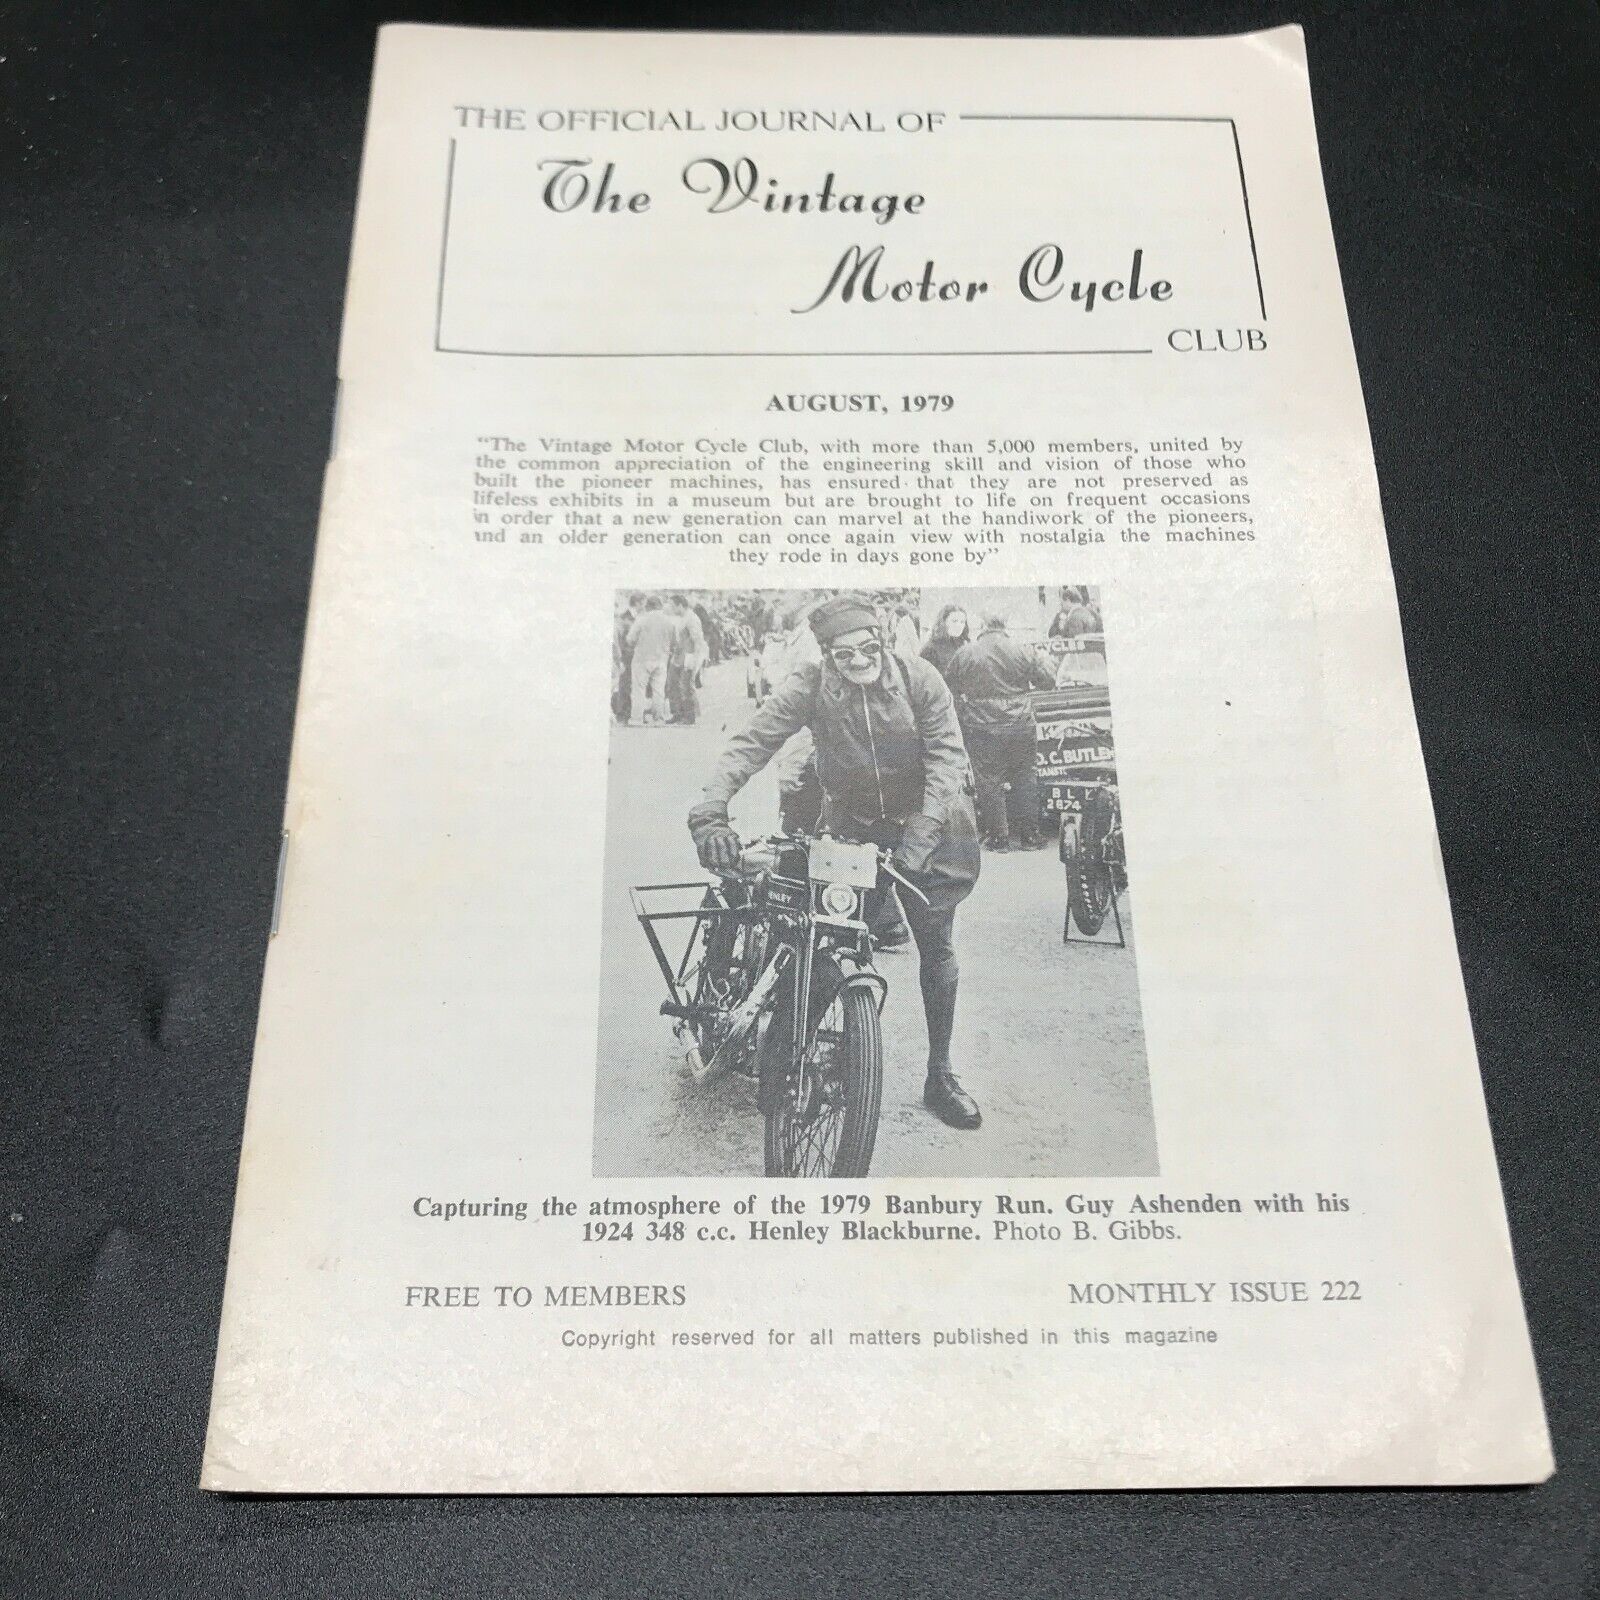 THE OFFICIAL JOURNAL THE VINTAGE MOTORCYCLE CLUB MAGAZINE AUGUST 1979